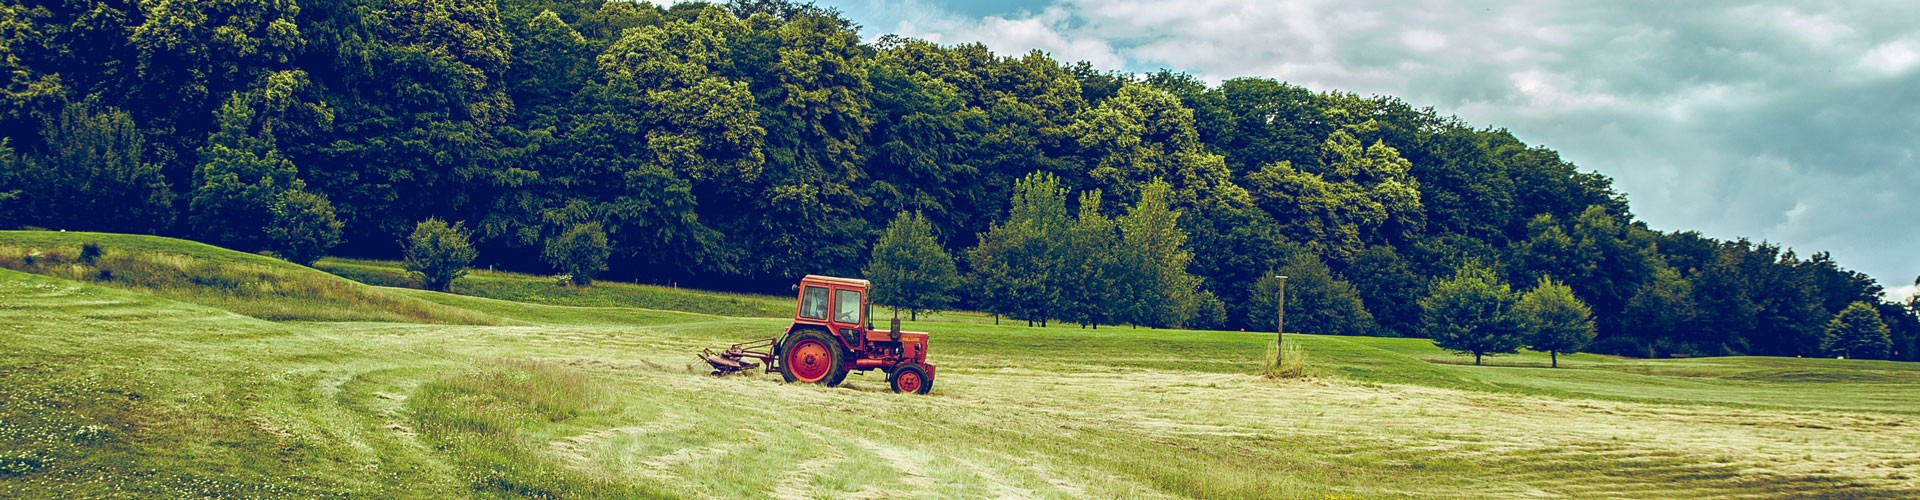 small red tractor in field with woods in background